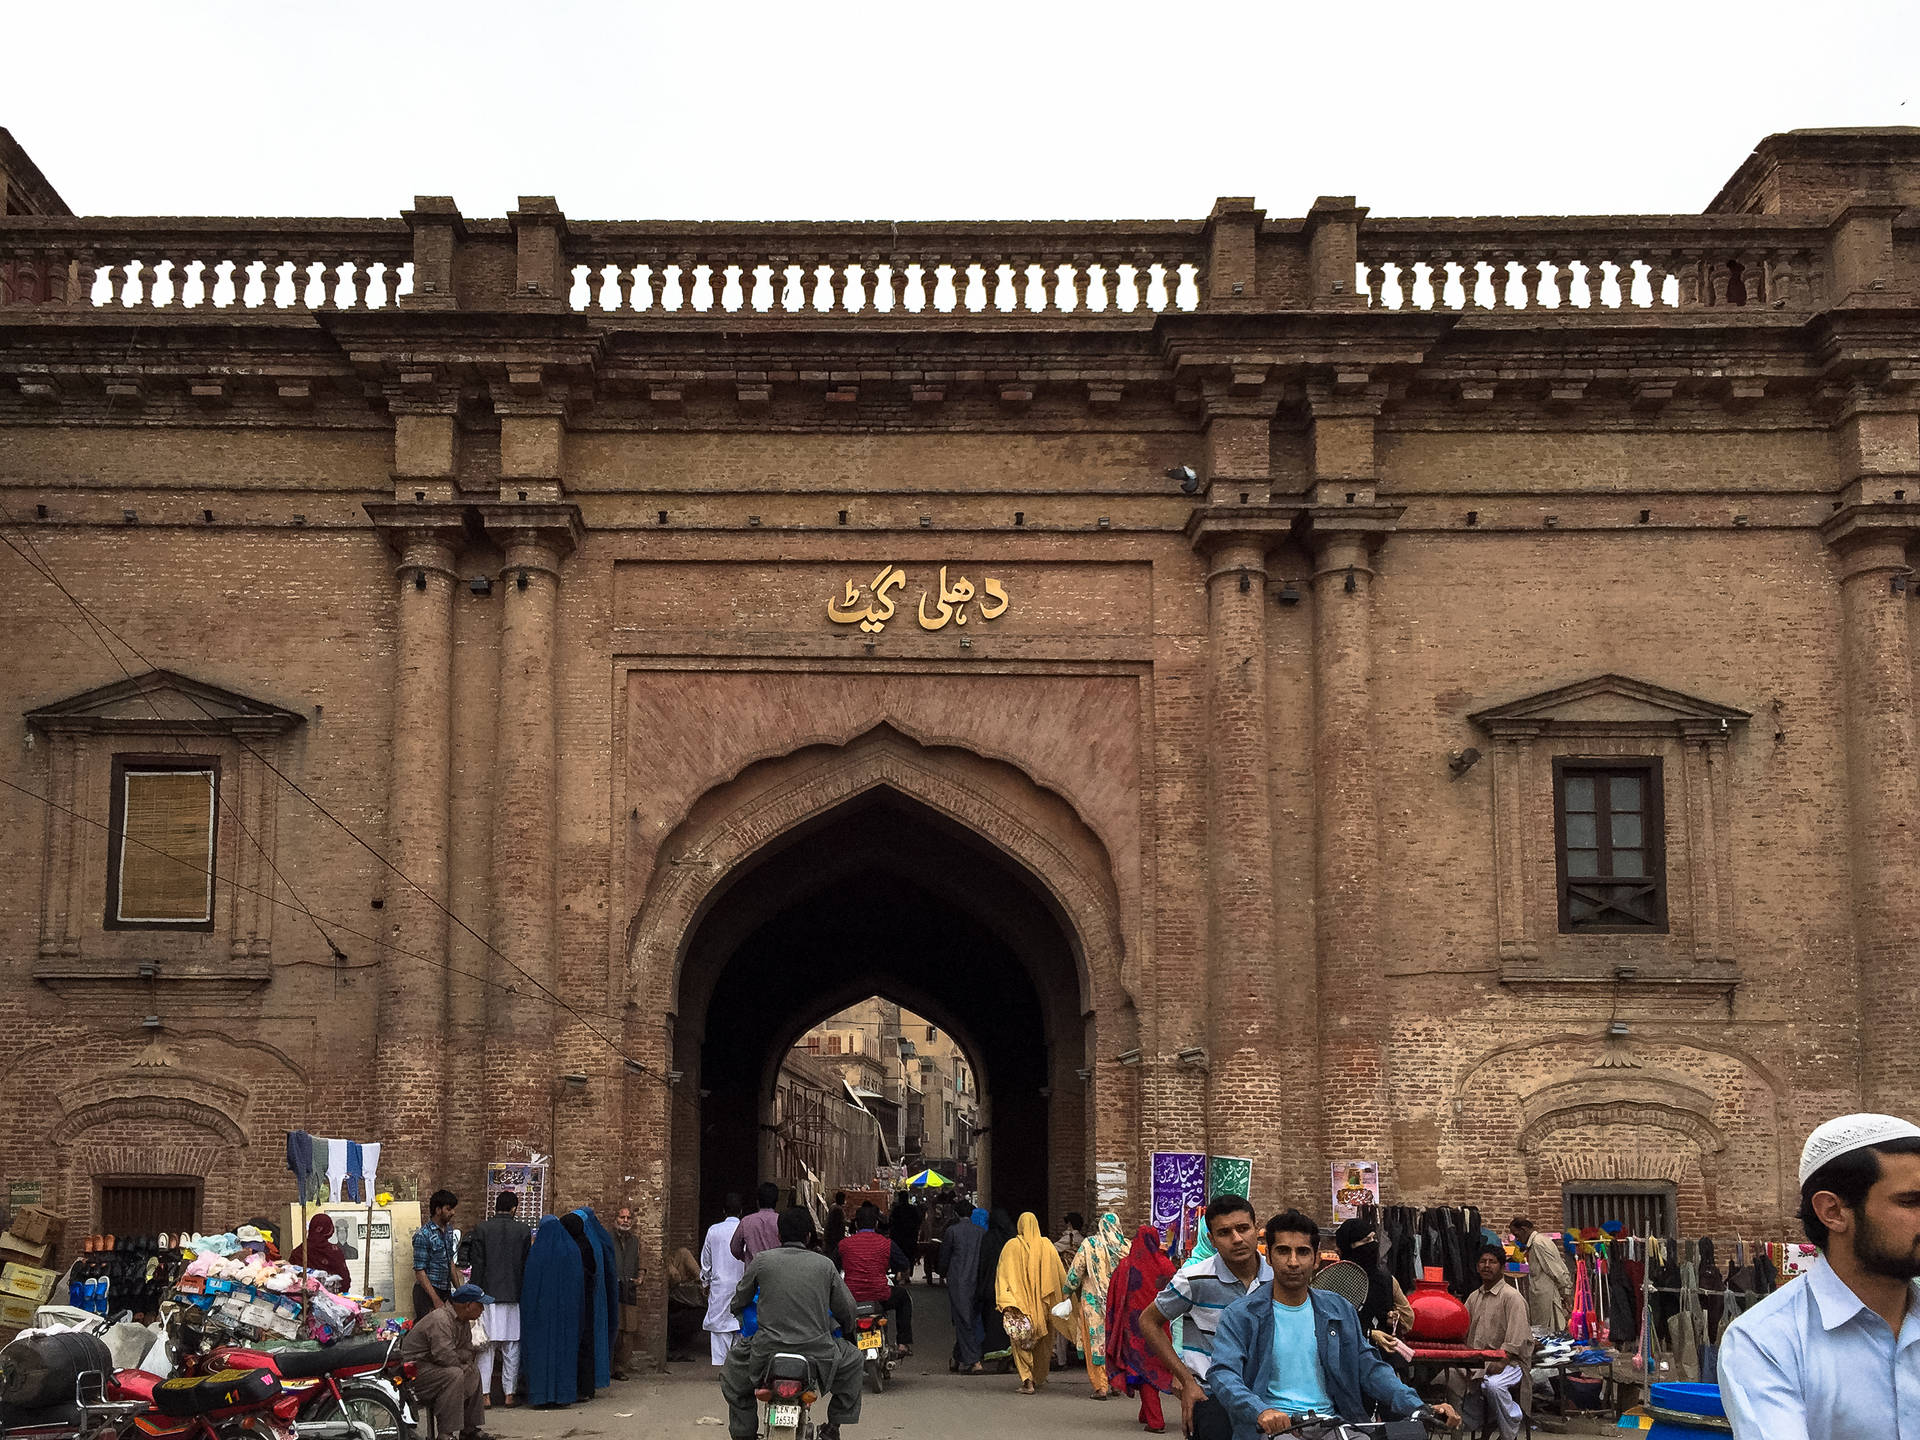 Caption: Sights And Wonders Of Lahore: Delhi Gate